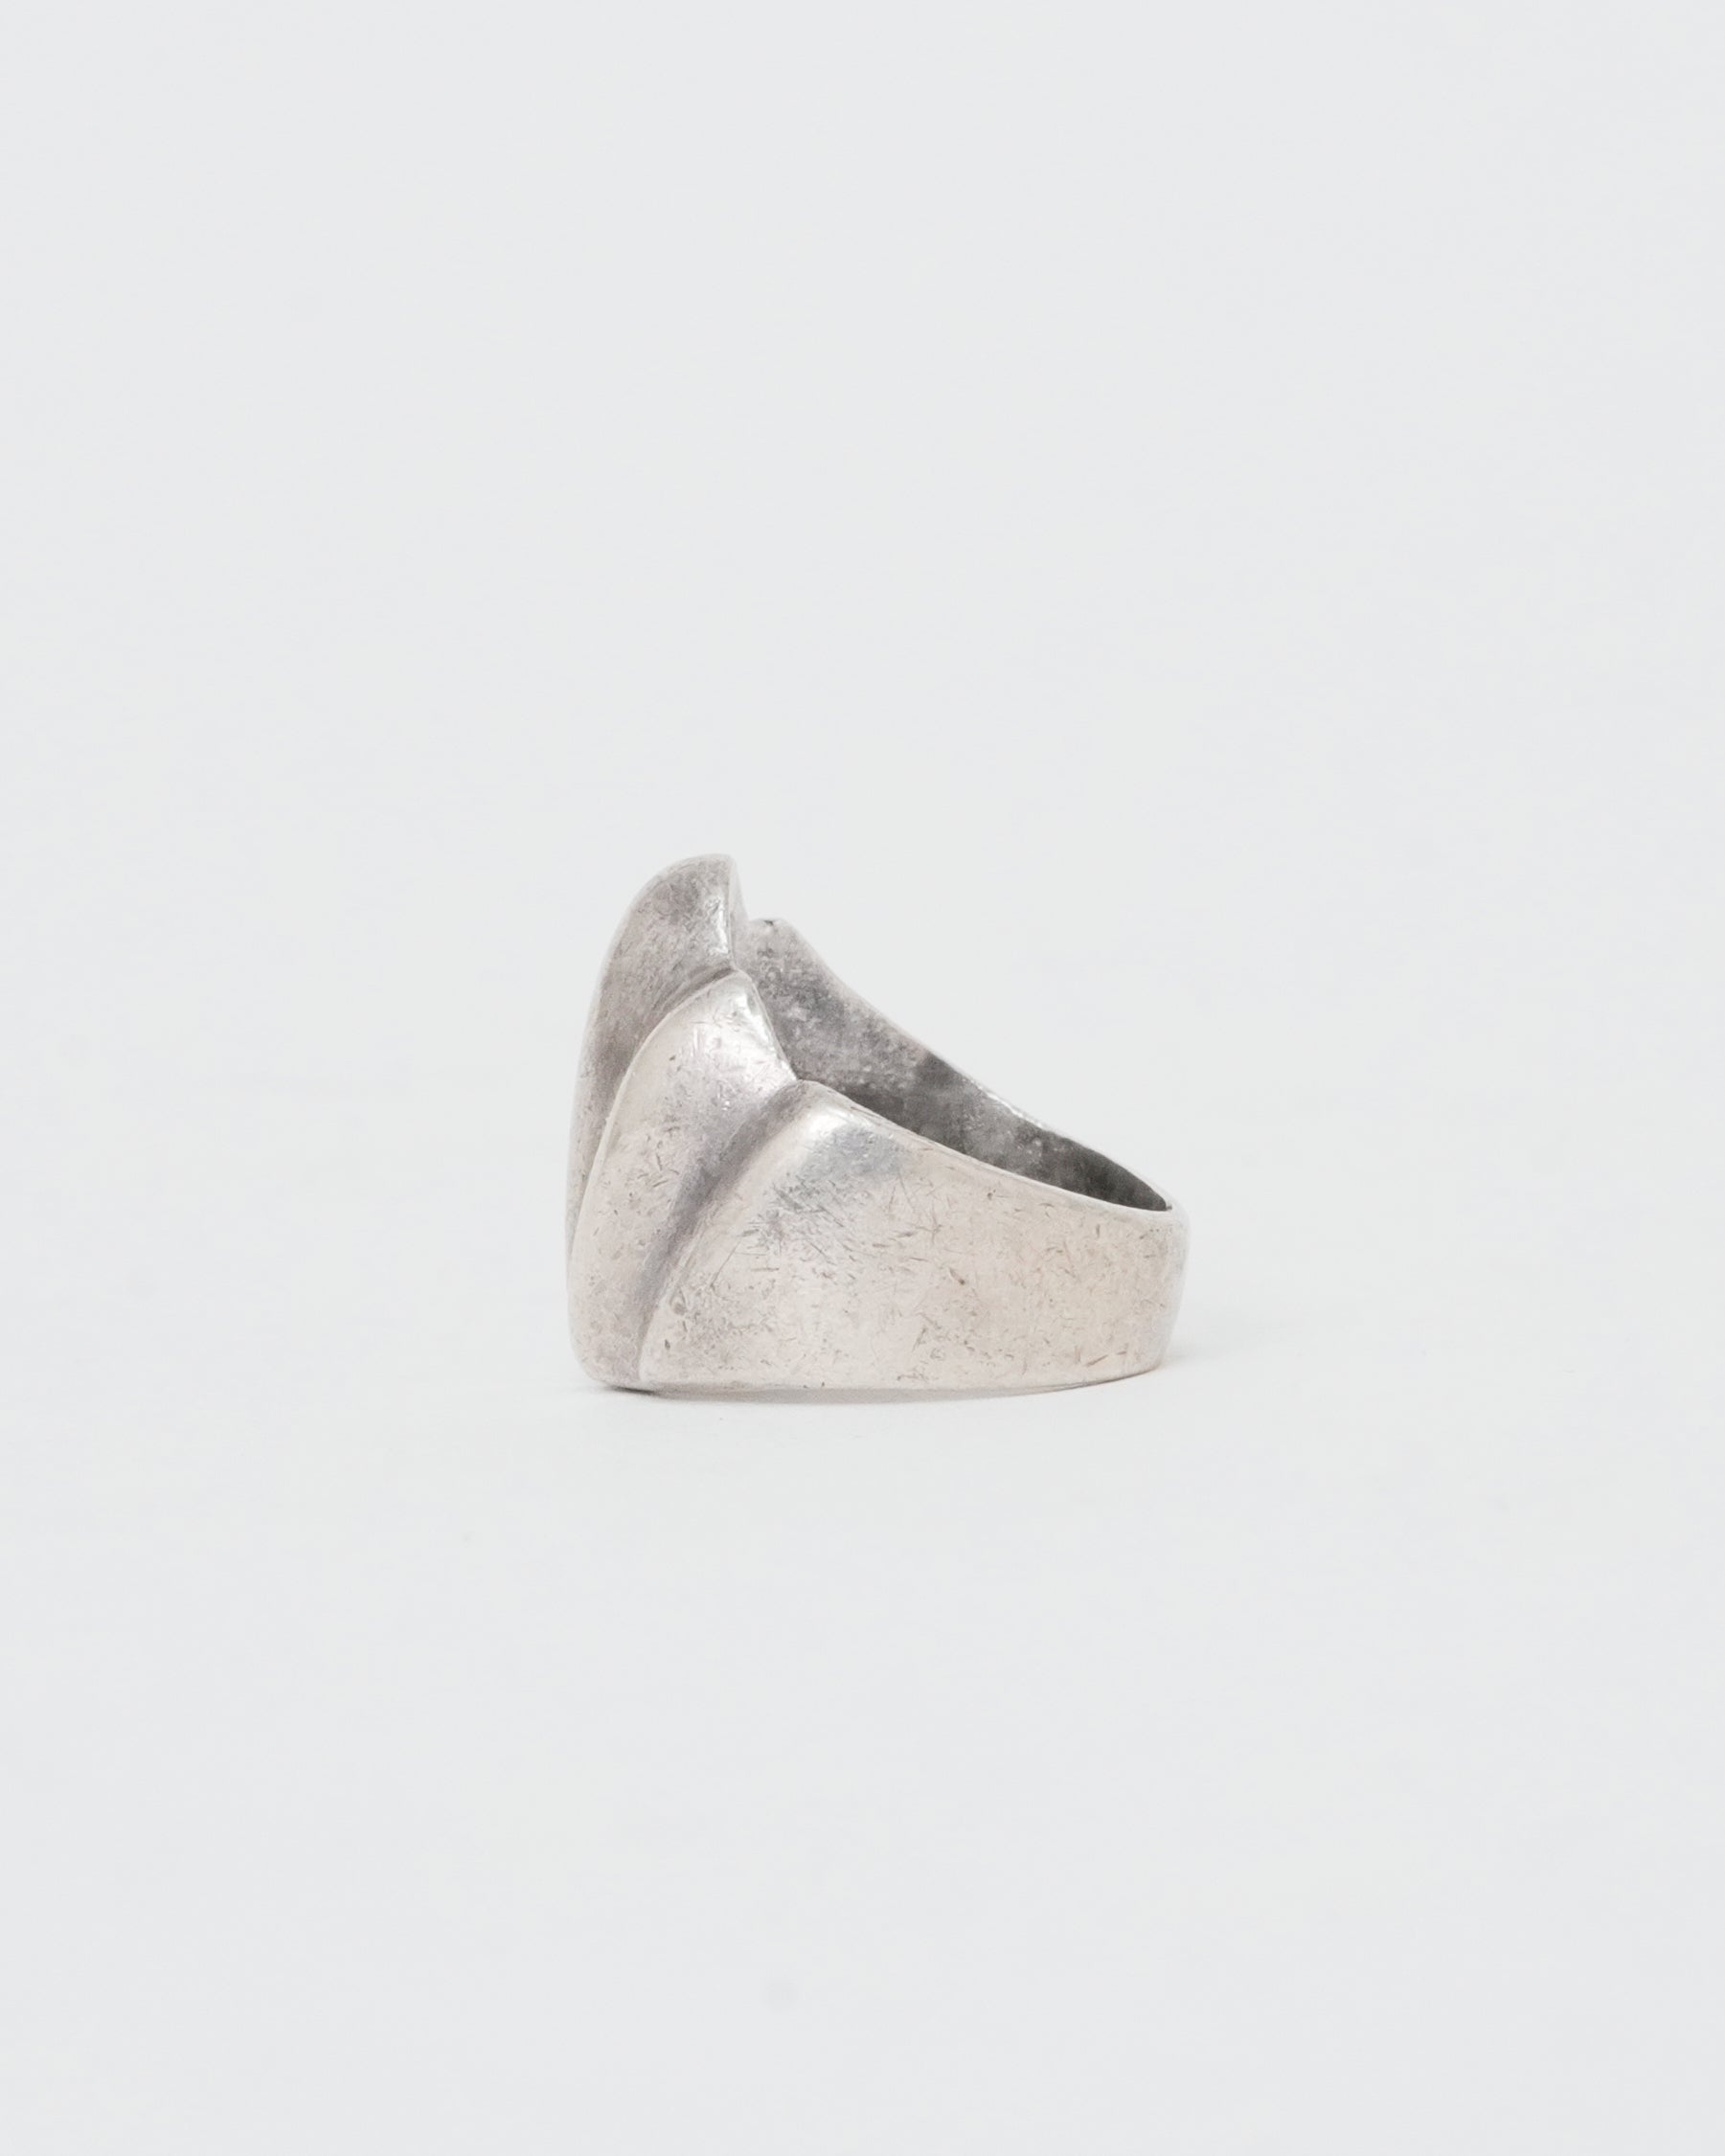 Silver Ring: Size7